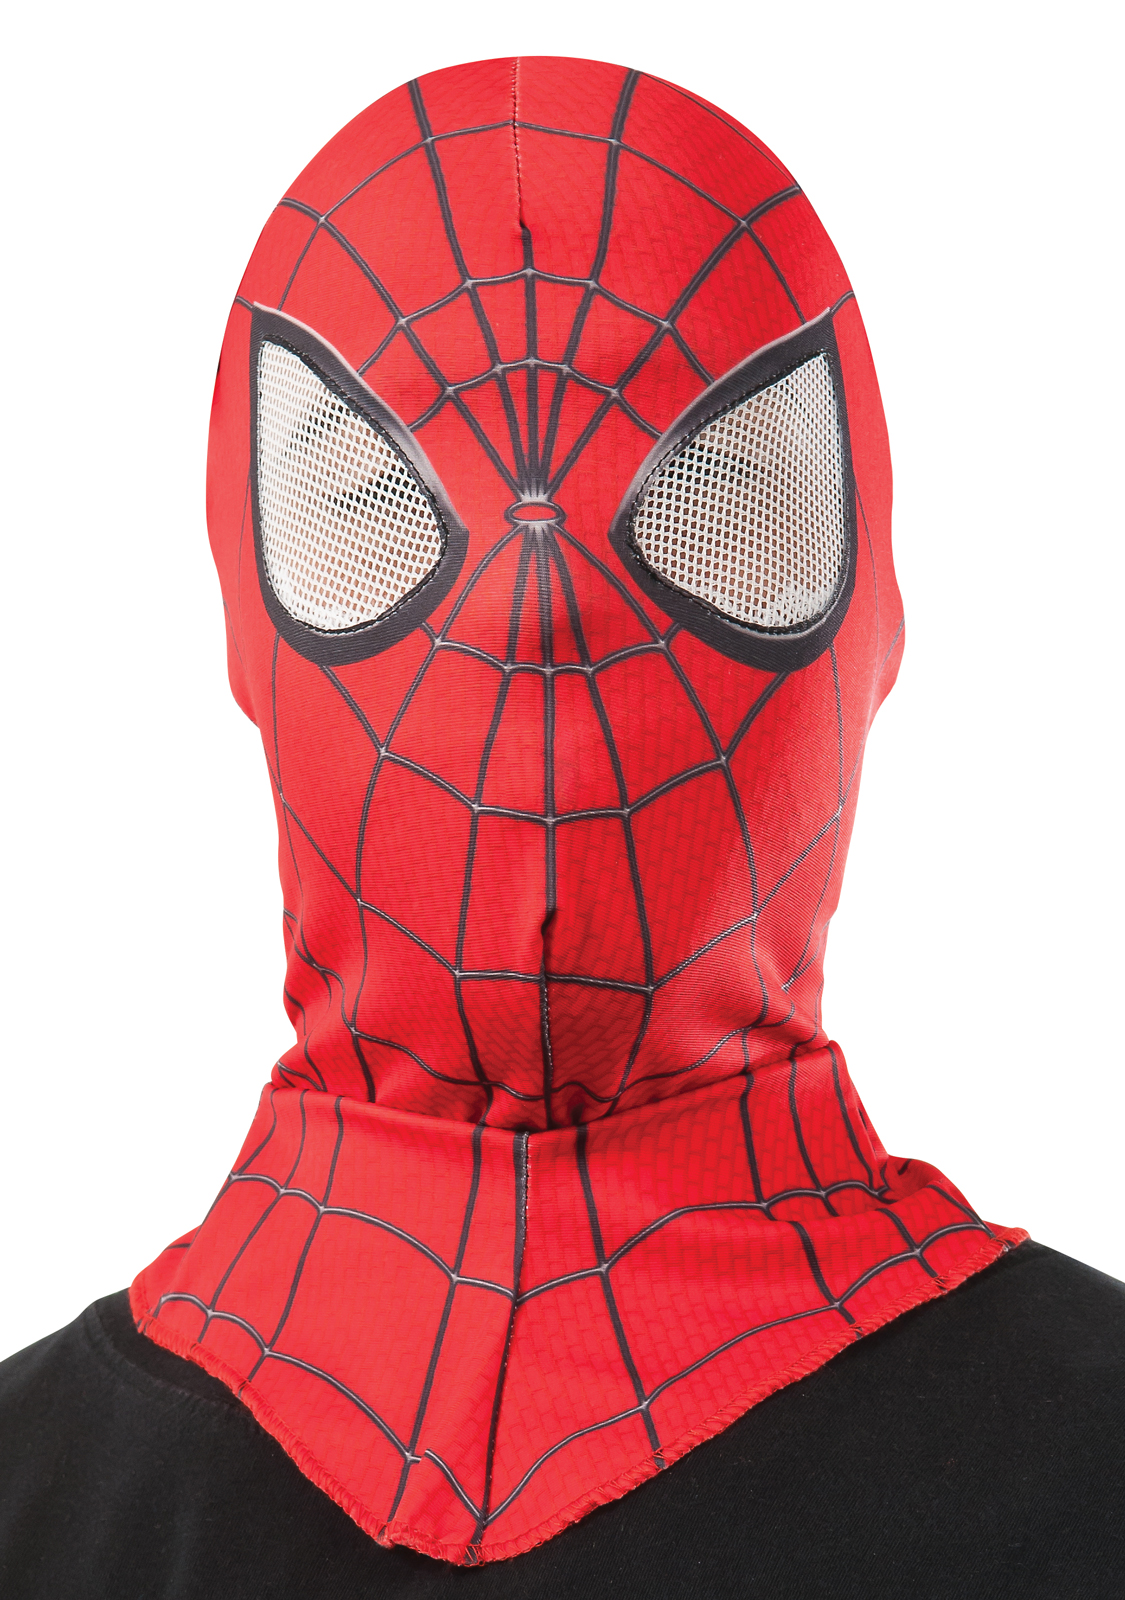 Rubie's Costume Co Men's Spider-man Adult Hood - Red - One-Size